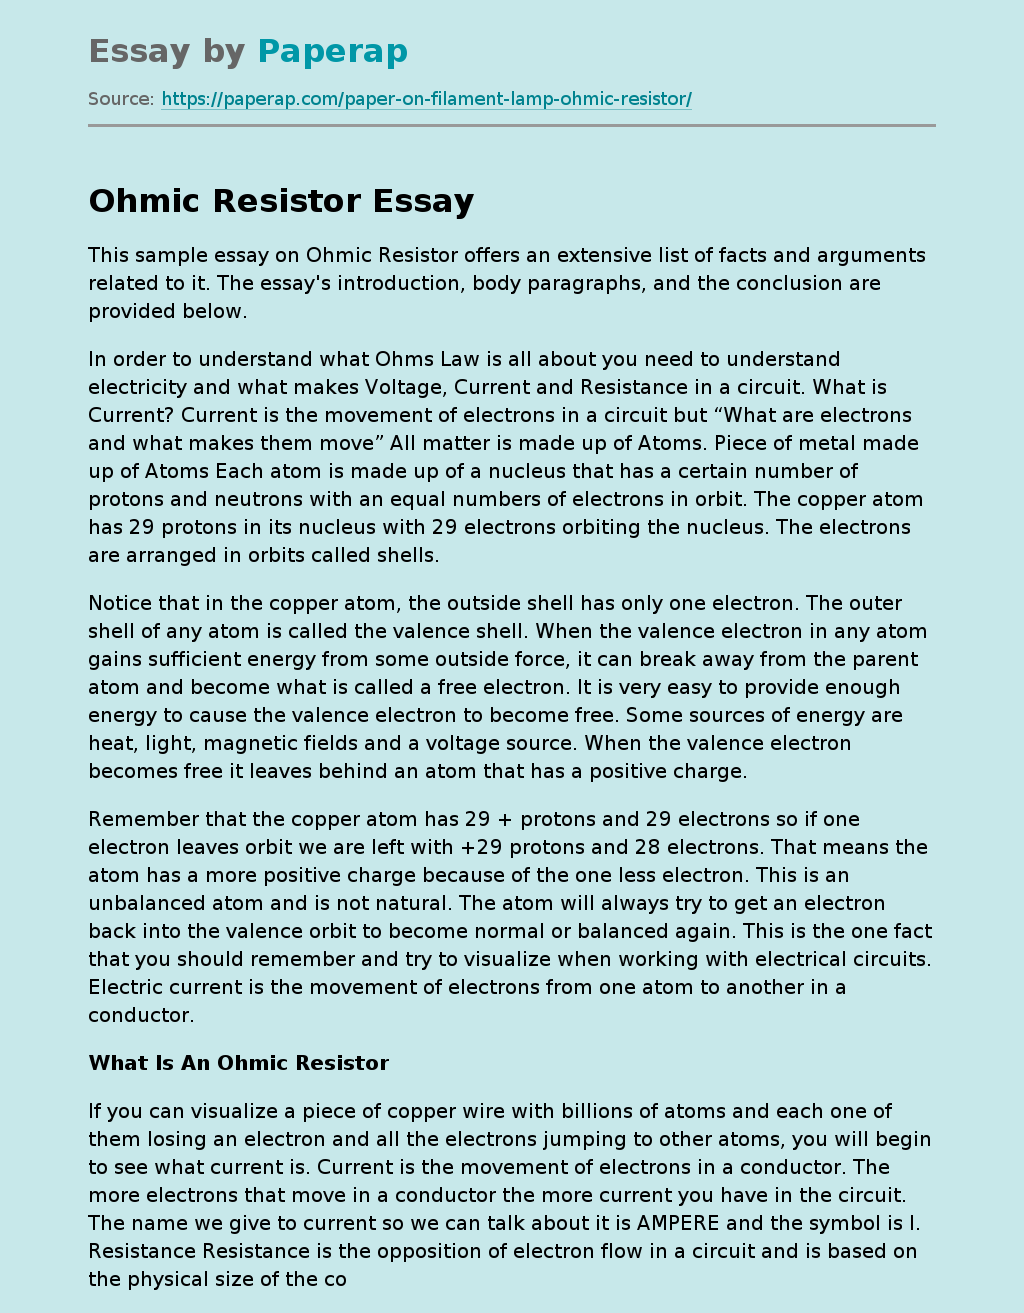 What Is An Ohmic Resistor